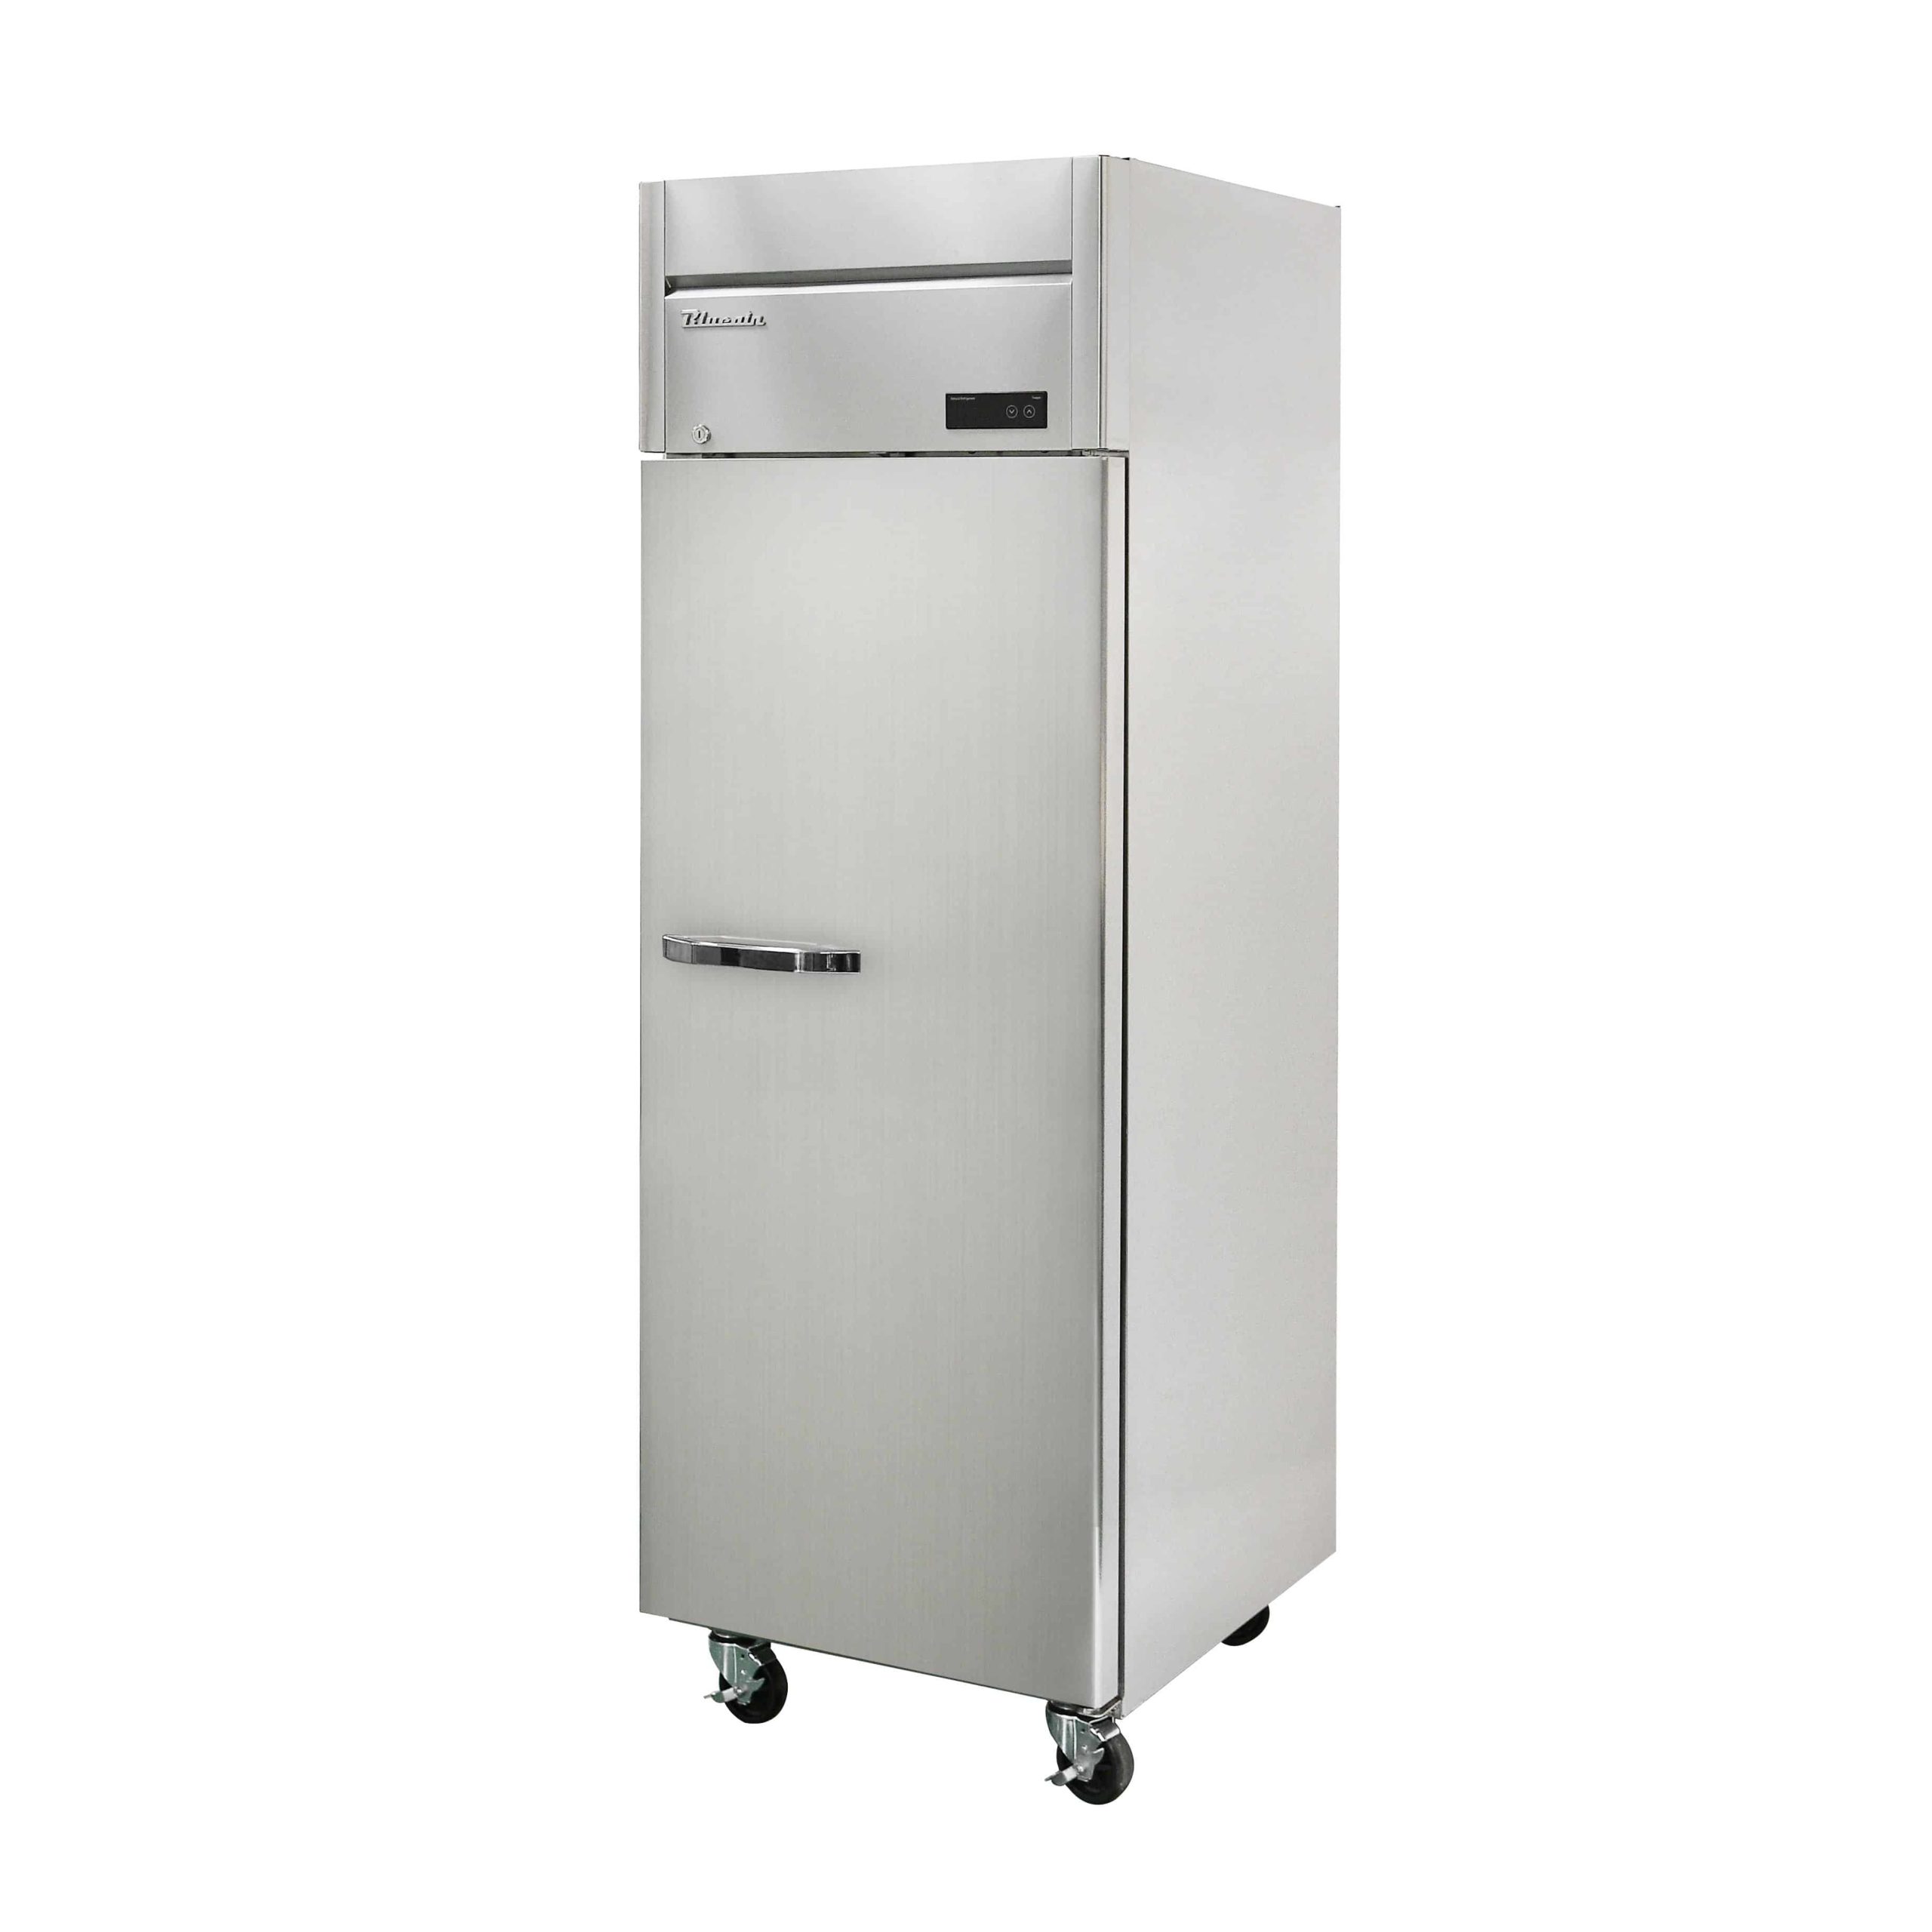 BLUE AIR REACH IN FREEZER, ONE 
SECTION 23 CU FT CAPACITY, TOP 
MOUNTED SELF-CONTAINED 
REFRIGERATION, 1 FULL SIZE 
SOLID METAL DOOR WITH 4 
ADJUSTABLE WIRE SHELVES (EA) 